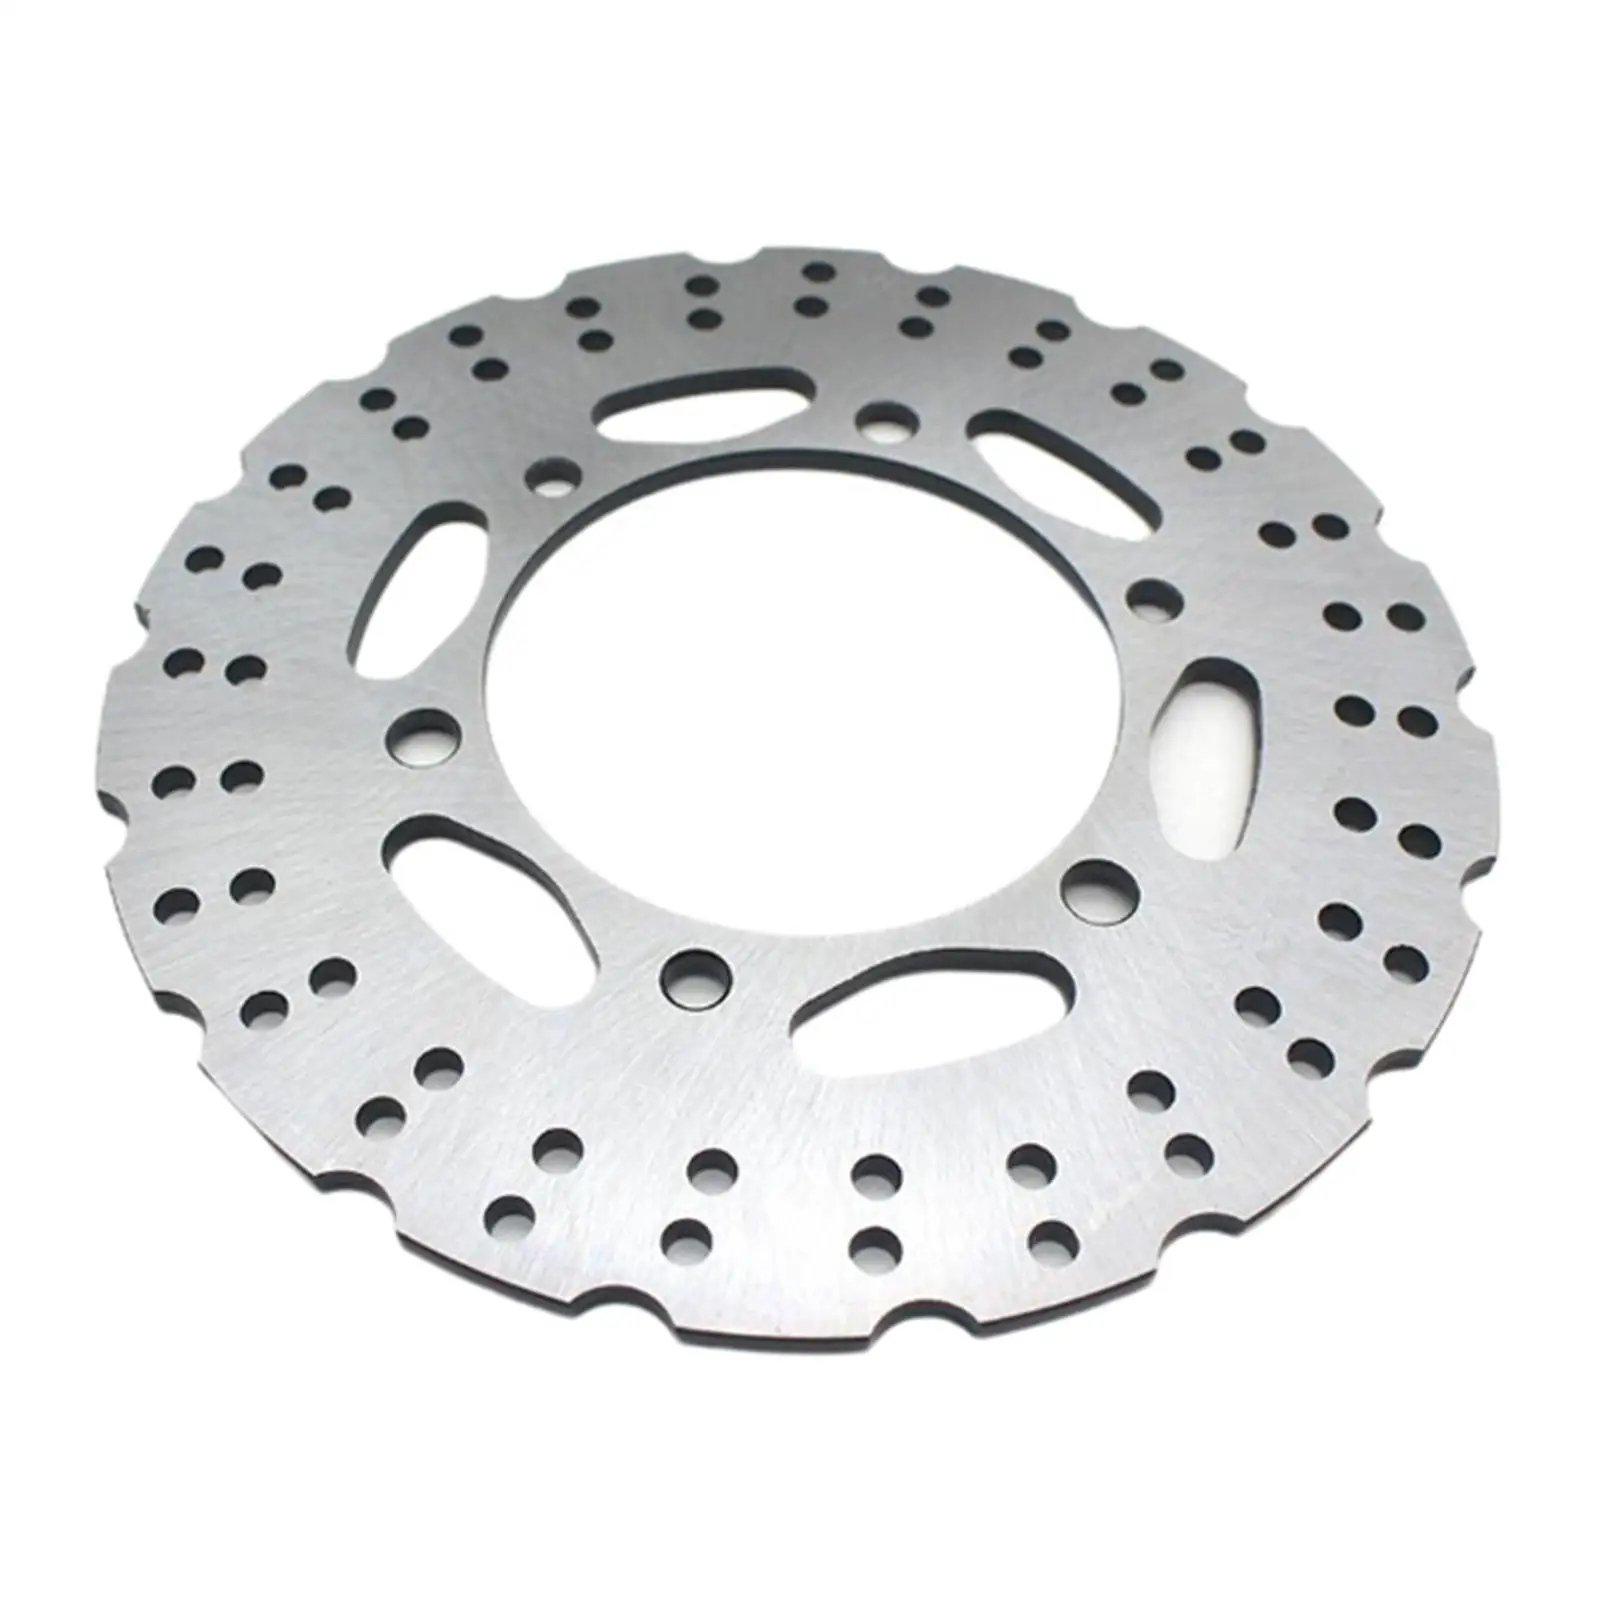 New Motorcycles Round Brake Wheel Disc Rotor, Fit for 300  13-18, for Accessory